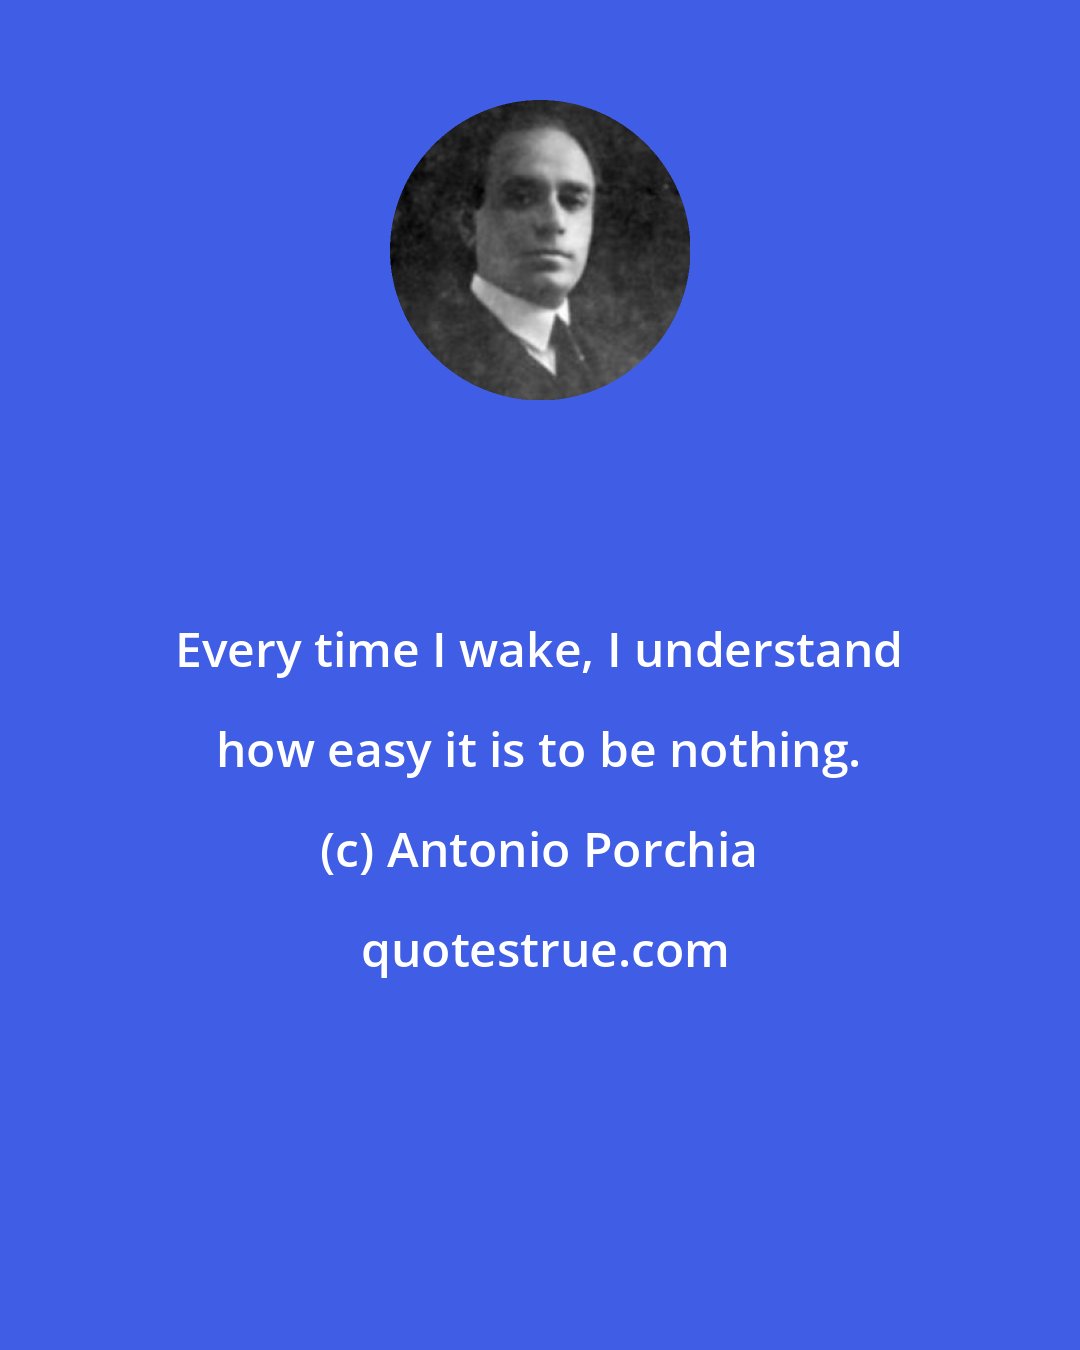 Antonio Porchia: Every time I wake, I understand how easy it is to be nothing.